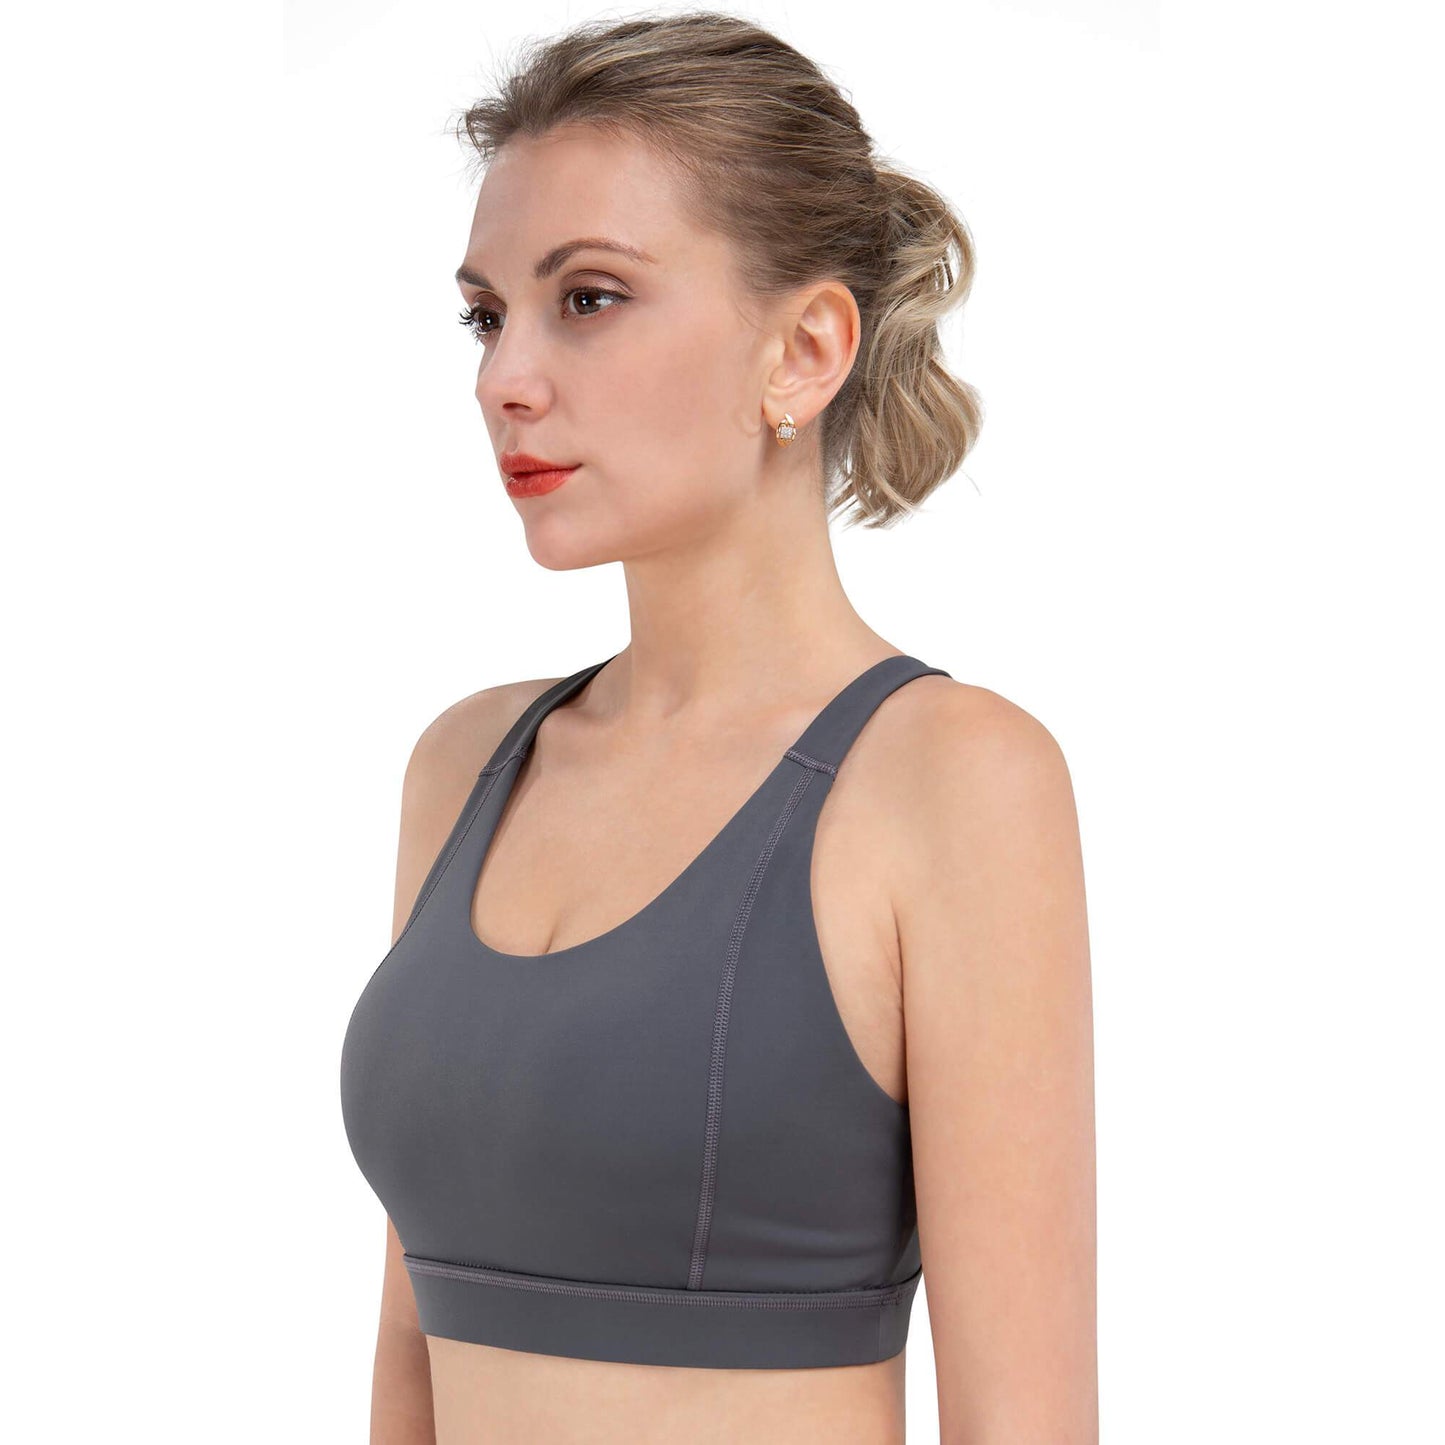 iKeep<sup>&reg;</sup> Yoga Bra with Removable Cups, Criss-Cross Back Padded Strappy | Grey